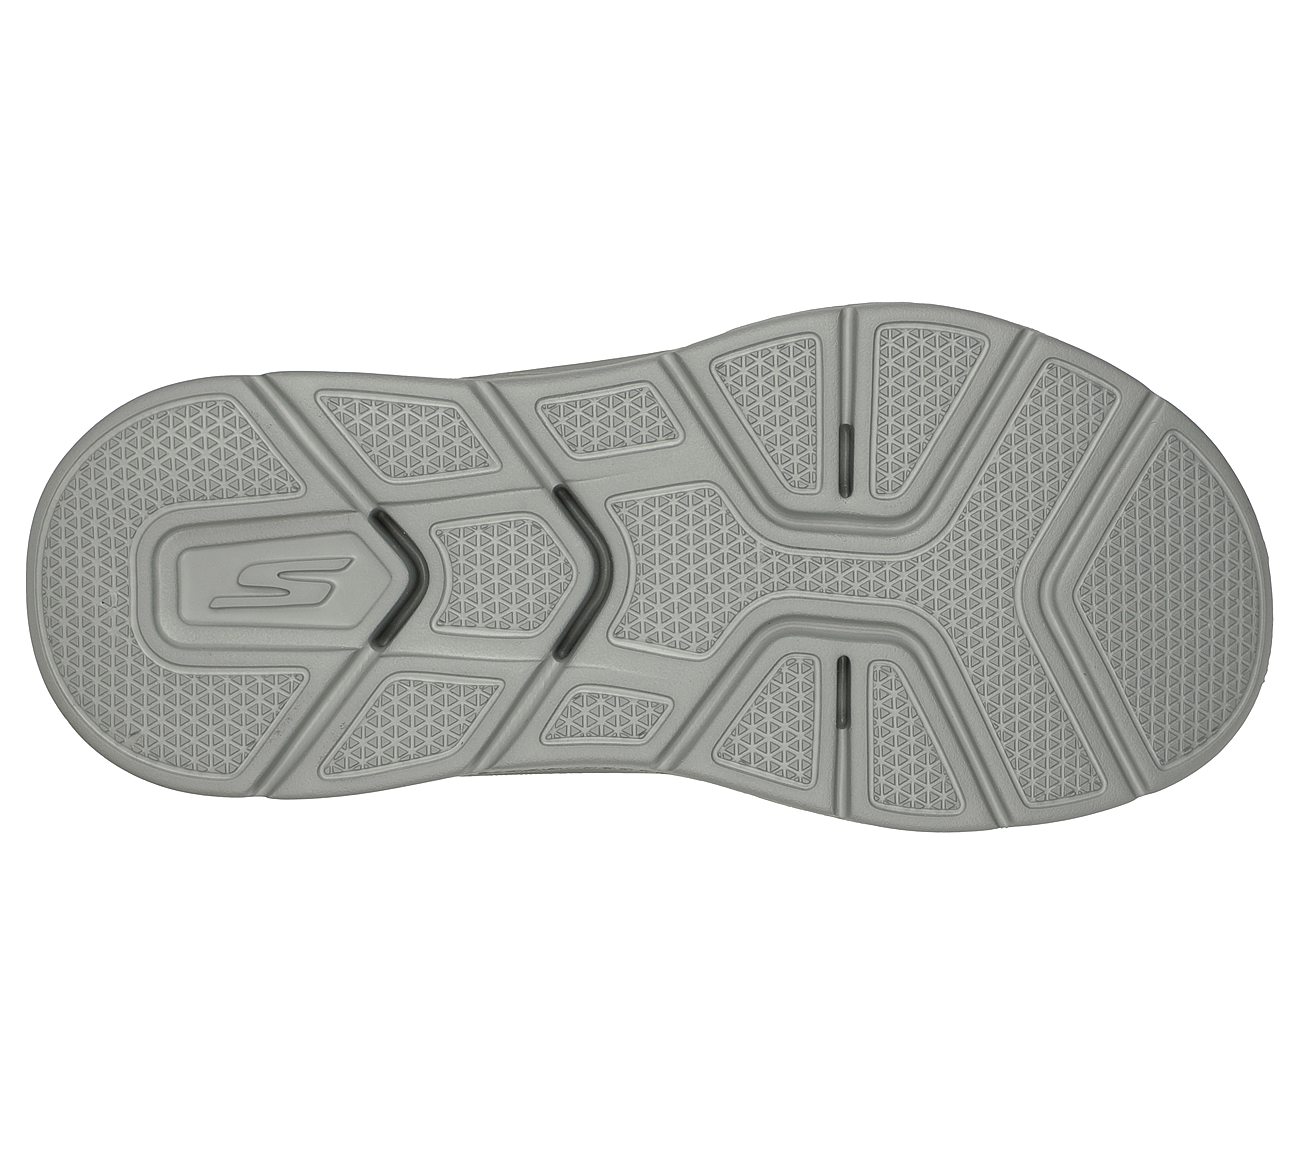 GO CONSISTENT SANDAL-SYNTHWAV, OOLIVE Footwear Bottom View